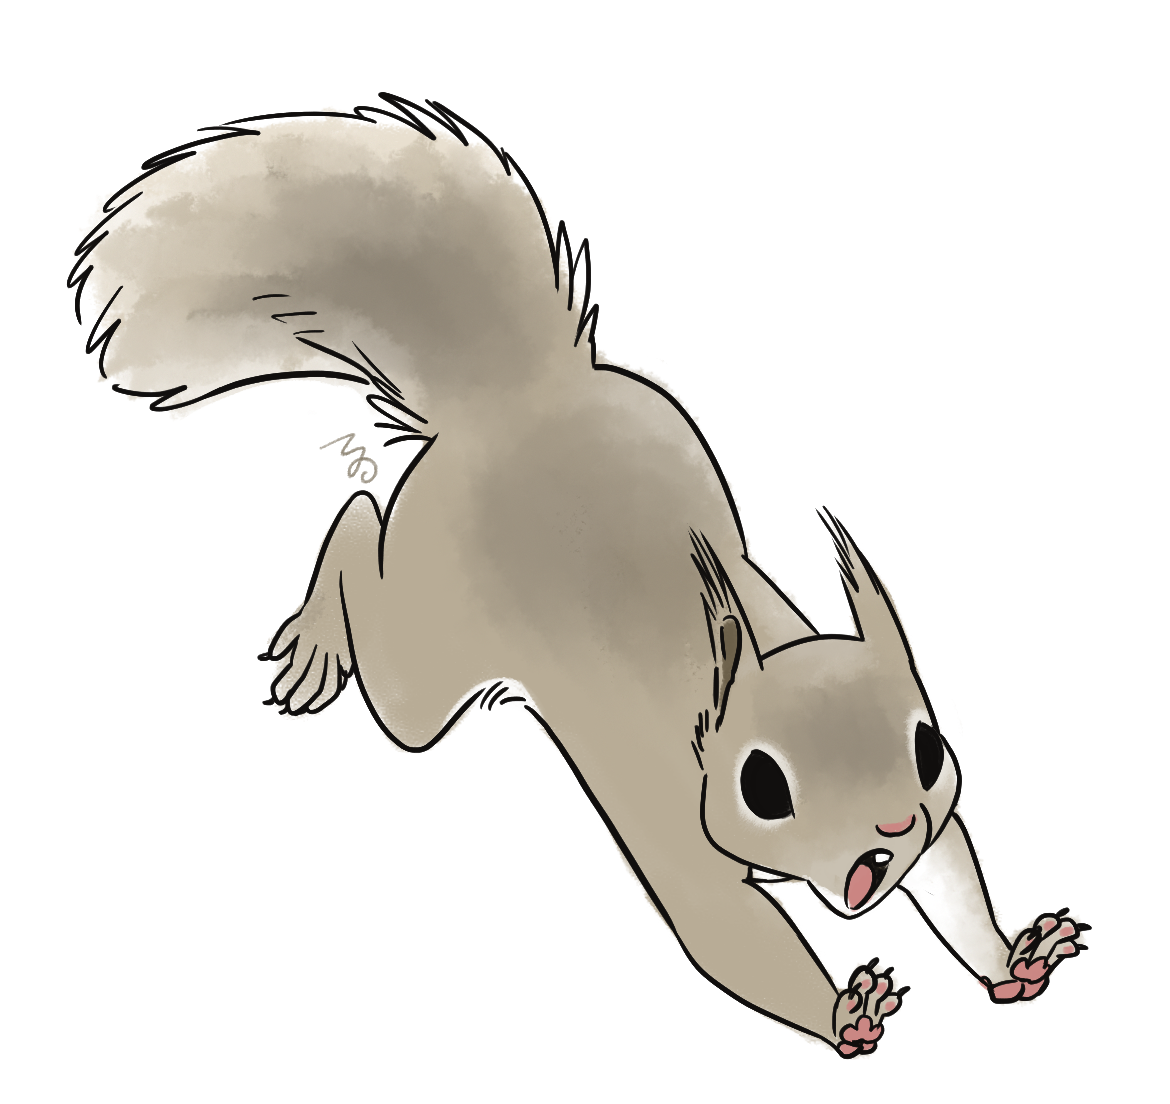 An adventuresome red squirrel, drawn in an anime style on Craiyon